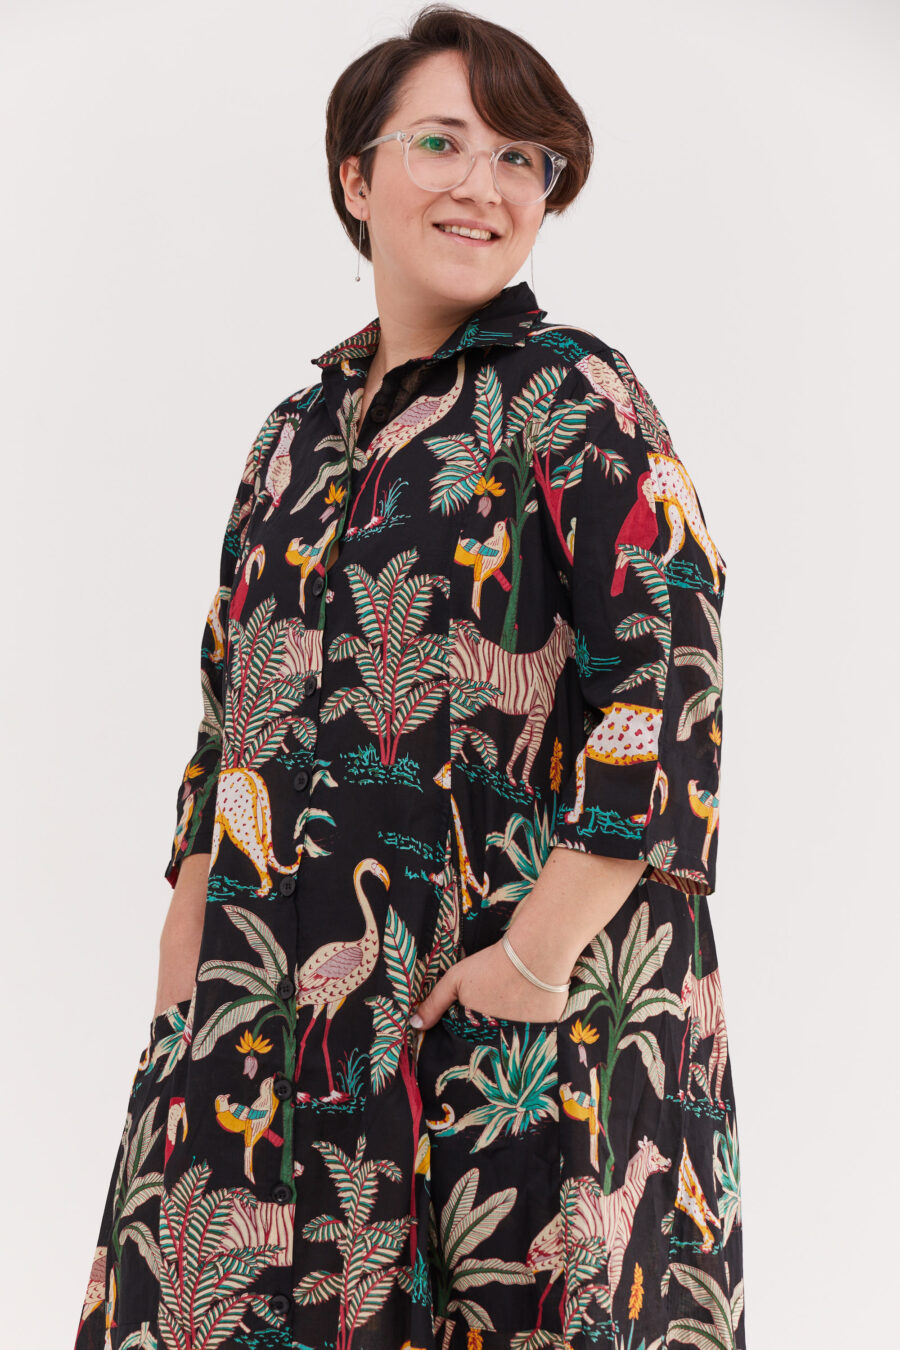 Aiya’le dress | Uniquely designed oversize dress - Safary print, black dress with animals print by comfort zone boutique